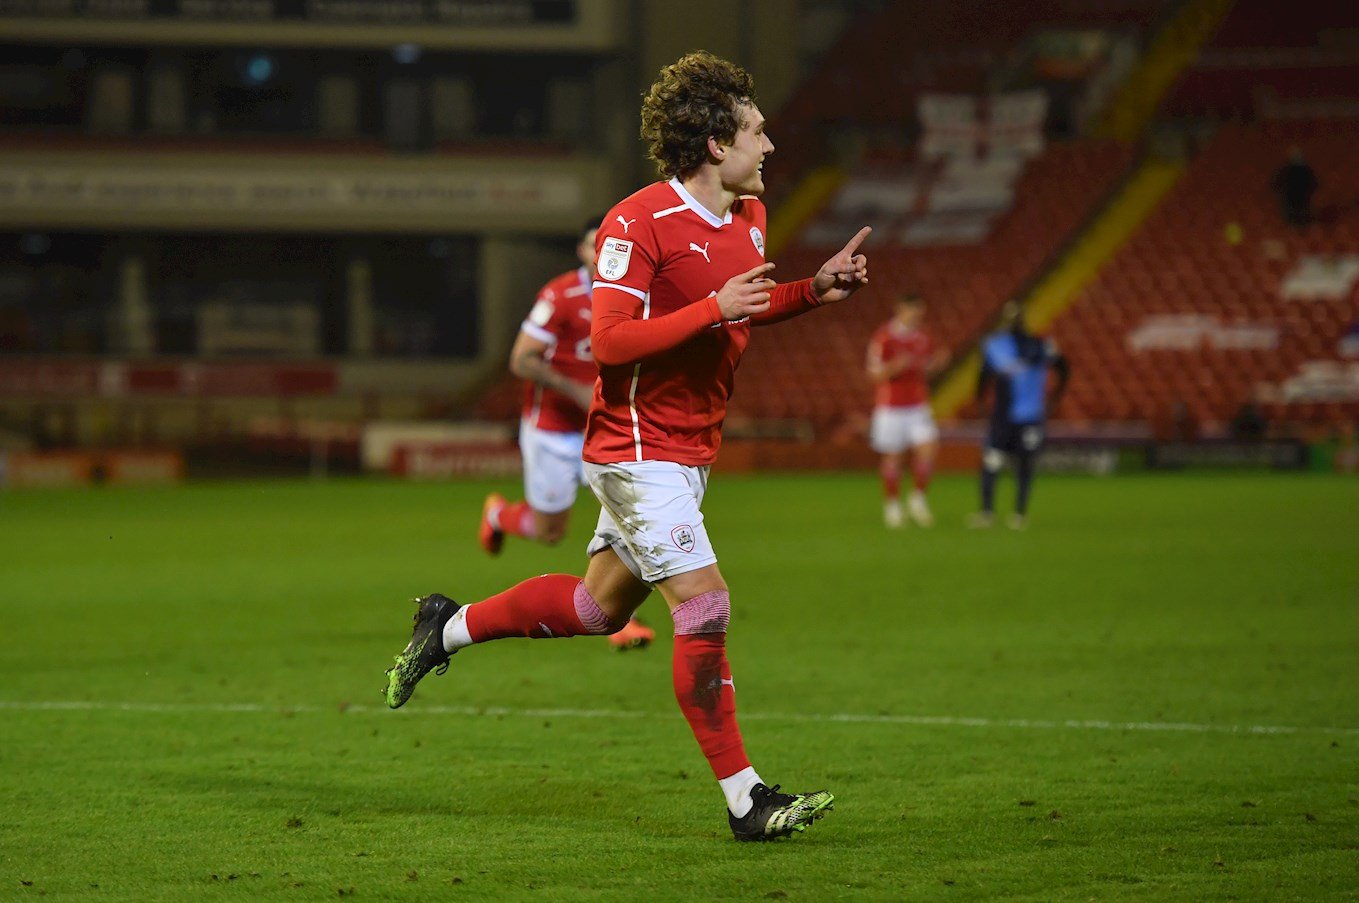 Callum celebrates after scoring against Wycombe Wanderers